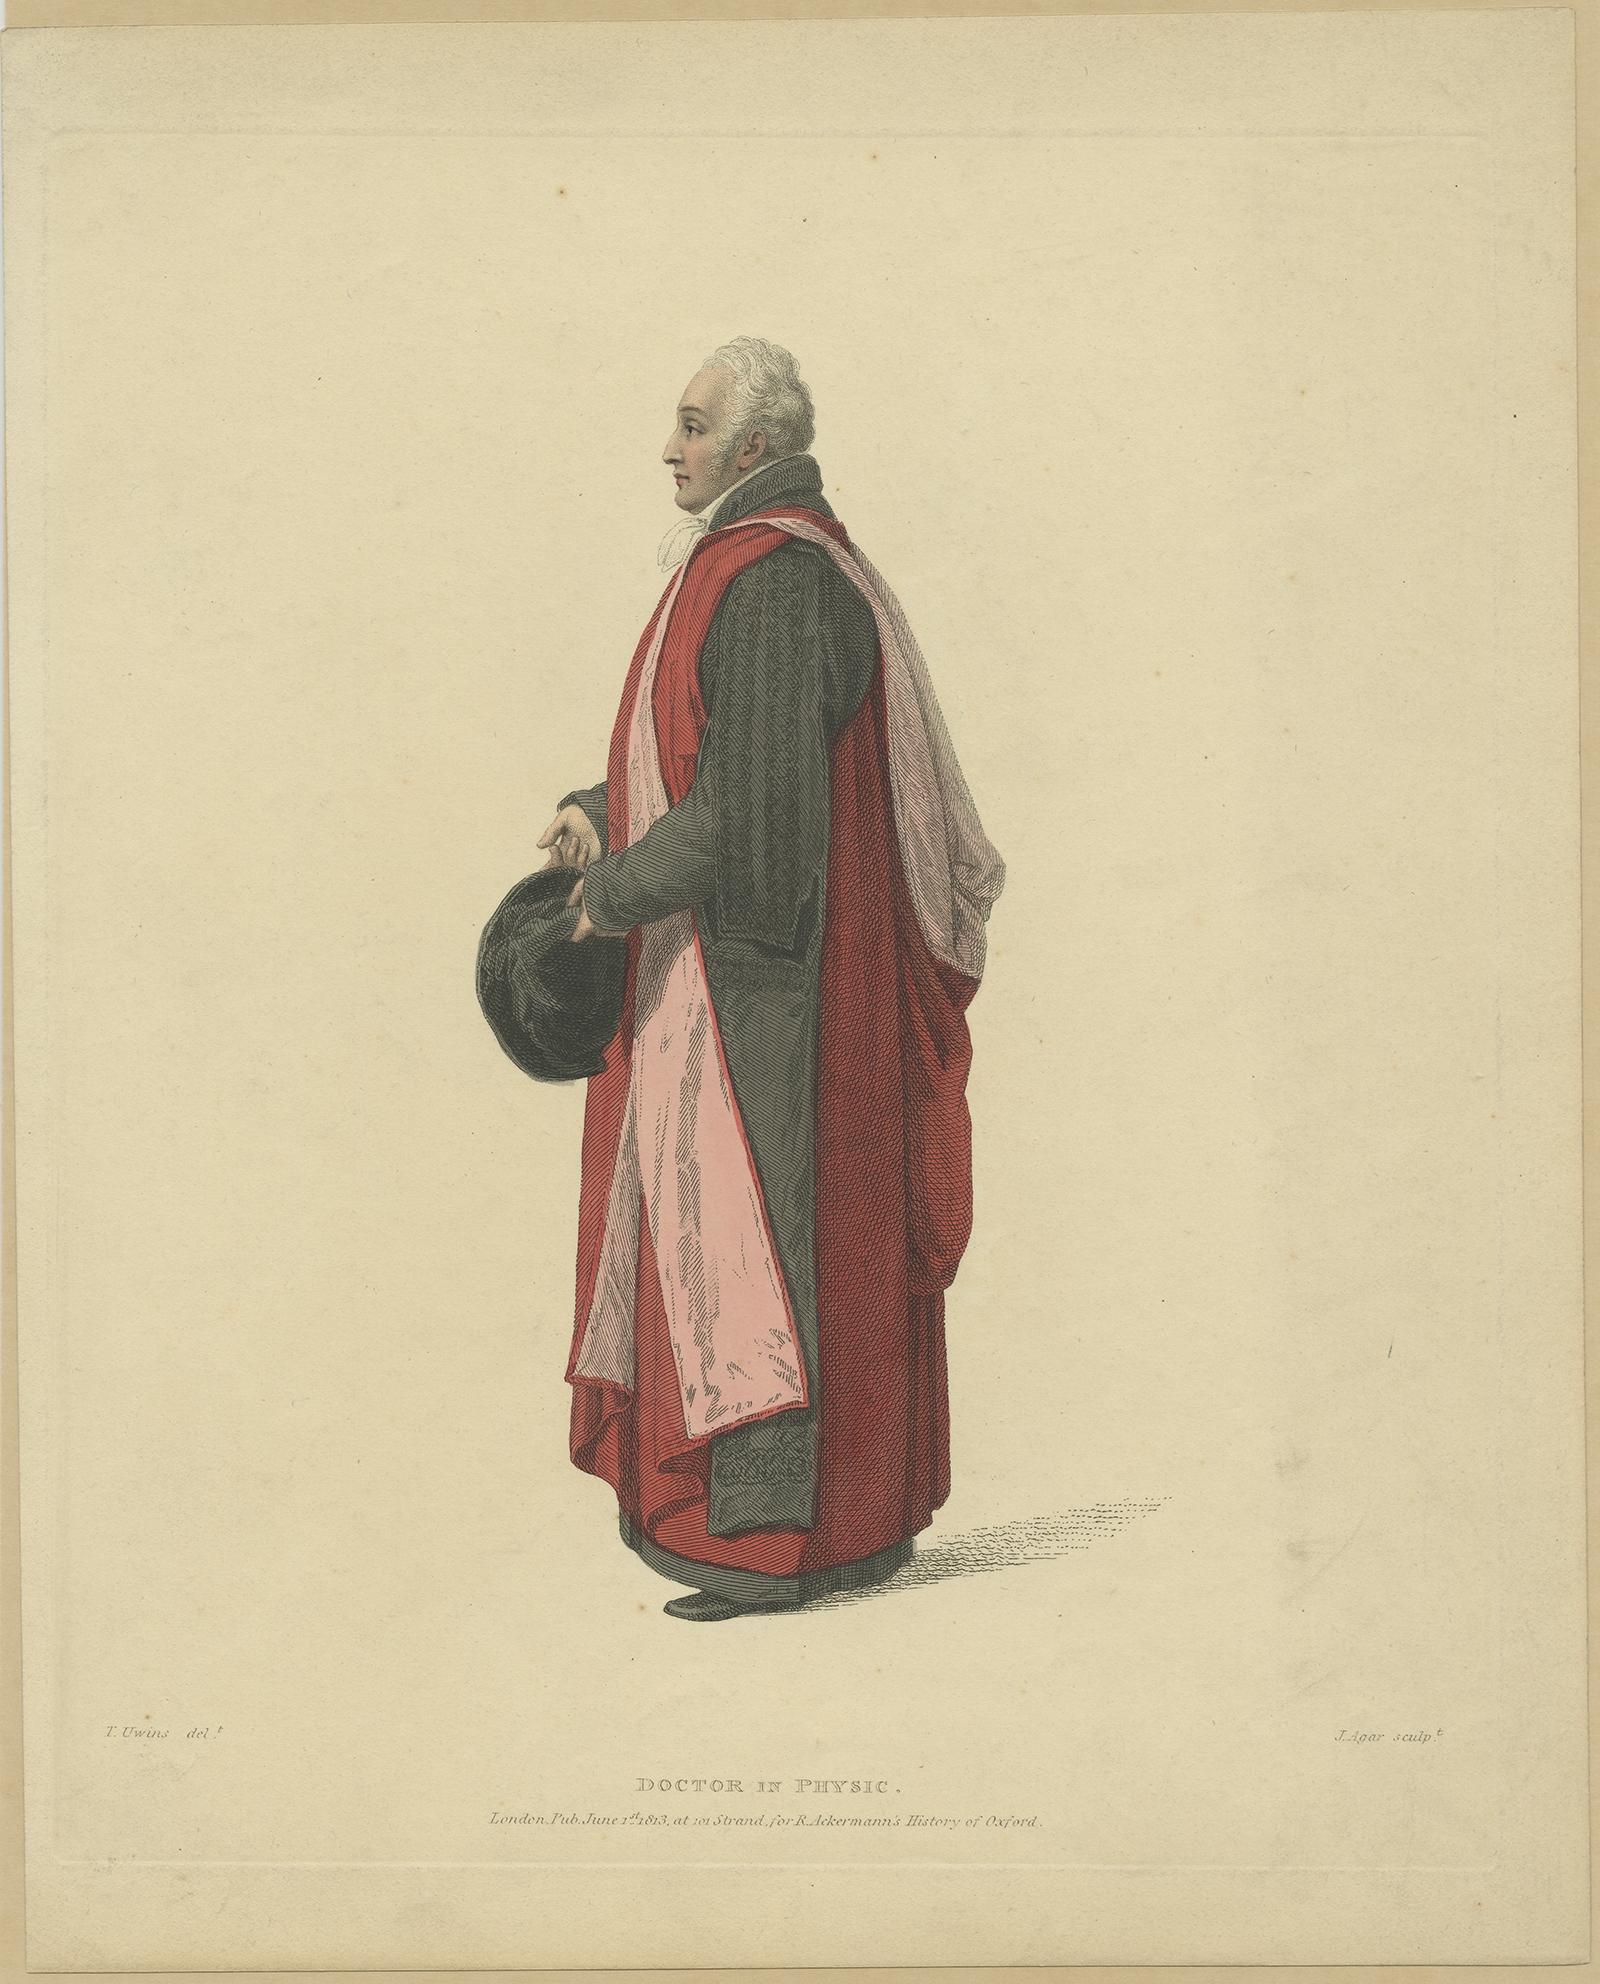 Old Print of Doctor in Physic Sir Christopher Pegge, in Convocation Dress, 1813 In Good Condition For Sale In Langweer, NL